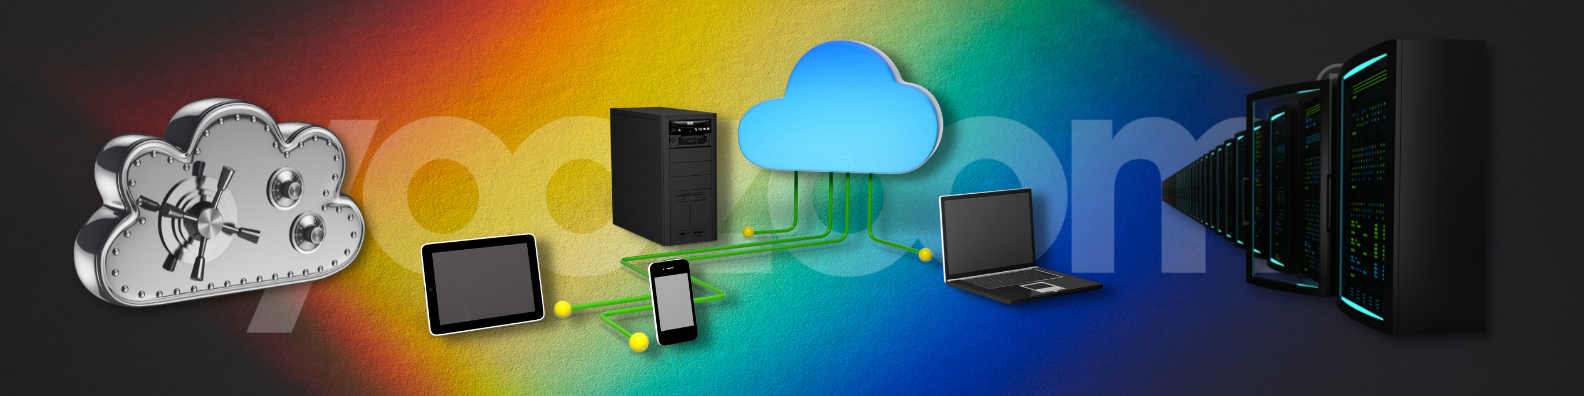 What are the different types of cloud computing? Public, Private, Hybrid explained